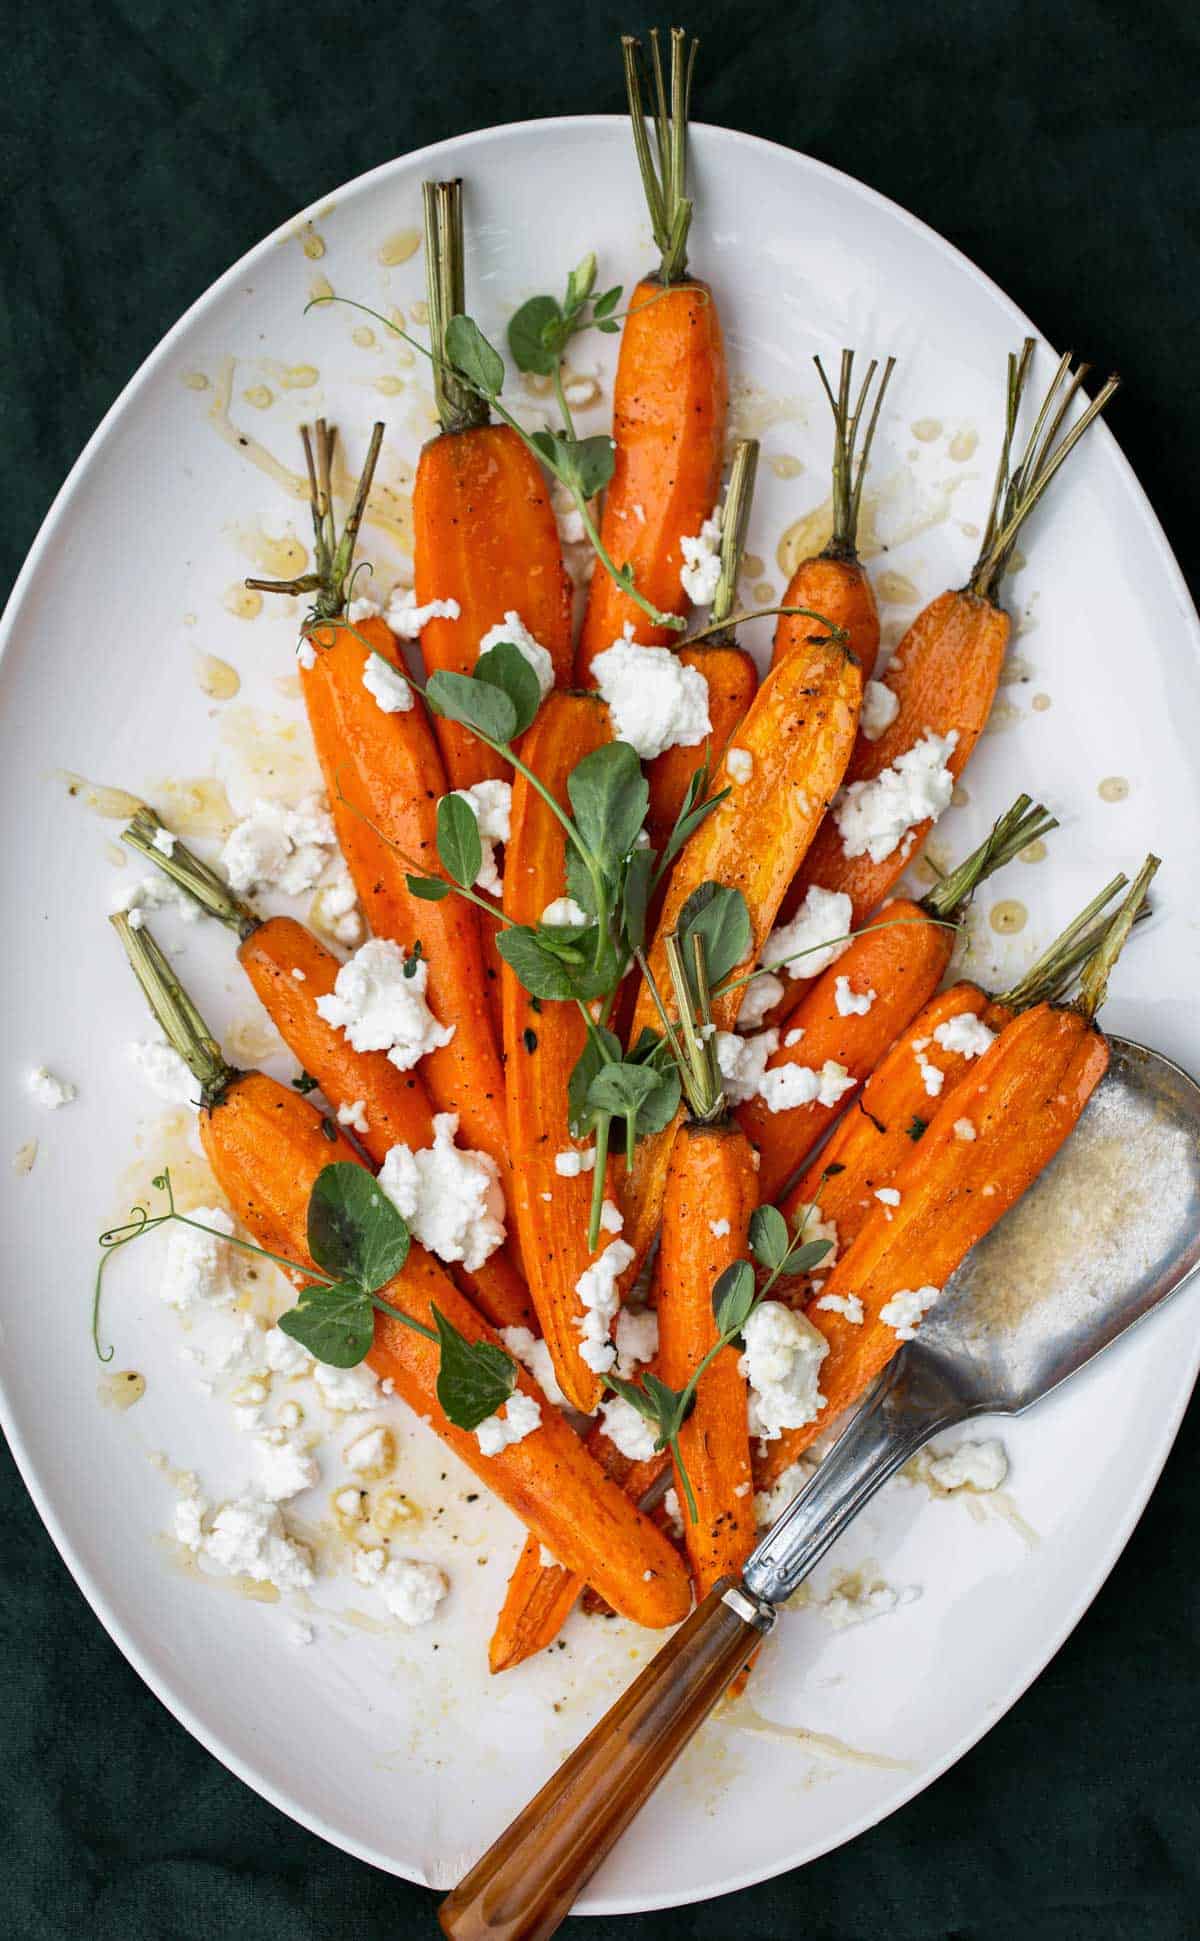 Hot Honey Roasted Carrots with goat cheese, thyme and hot honey agrodolce are perfect to serve with salmon, steak, ham, turkey and more! roasted carrots | baked carrots with honey | roasted root vegetables  hot honey recipe 